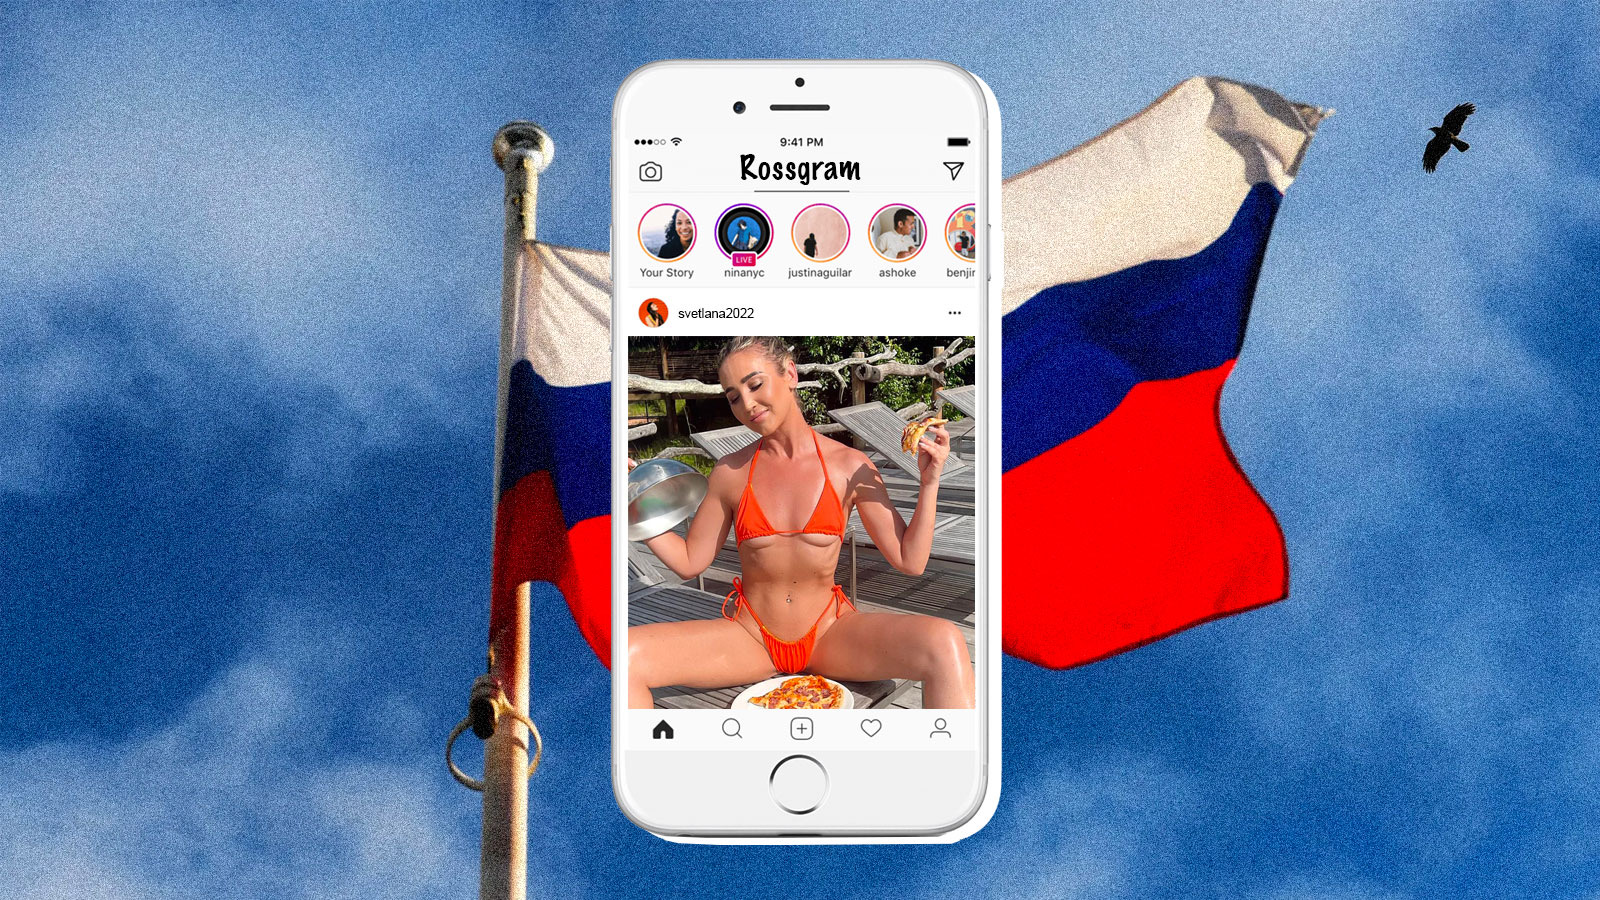 Rossgram is Russia’s Answer To Instagram